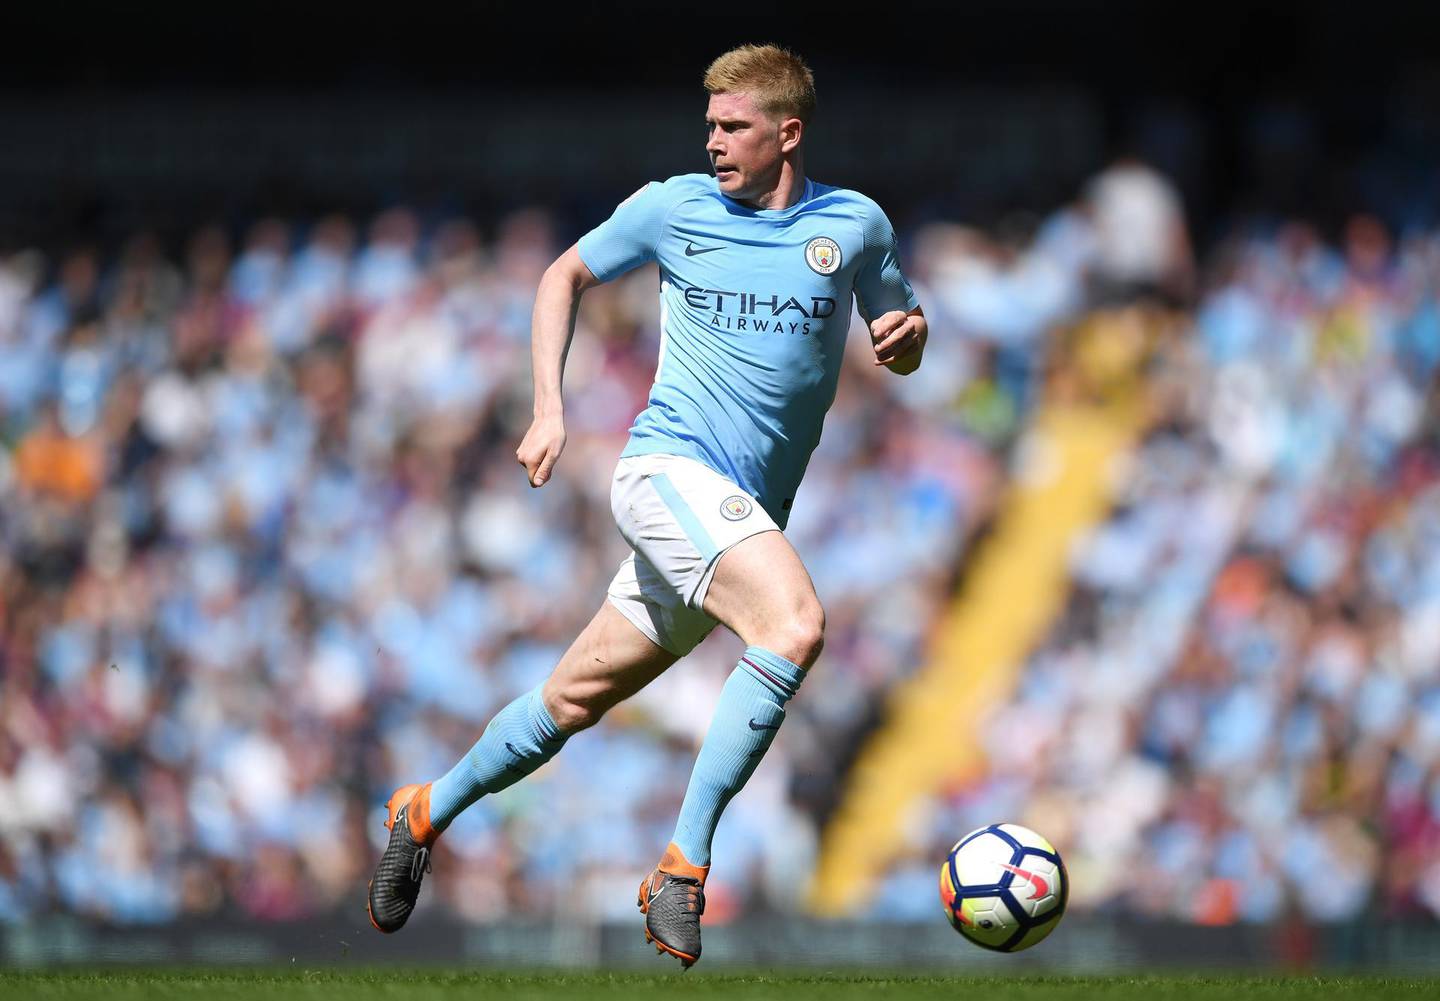 MANCHESTER, ENGLAND - MAY 06: Kevin De Bruyne of Manchester City runs with the ball during the Premier League match between Manchester City and Huddersfield Town at Etihad Stadium on May 6, 2018 in Manchester, England.  (Photo by Shaun Botterill/Getty Images)